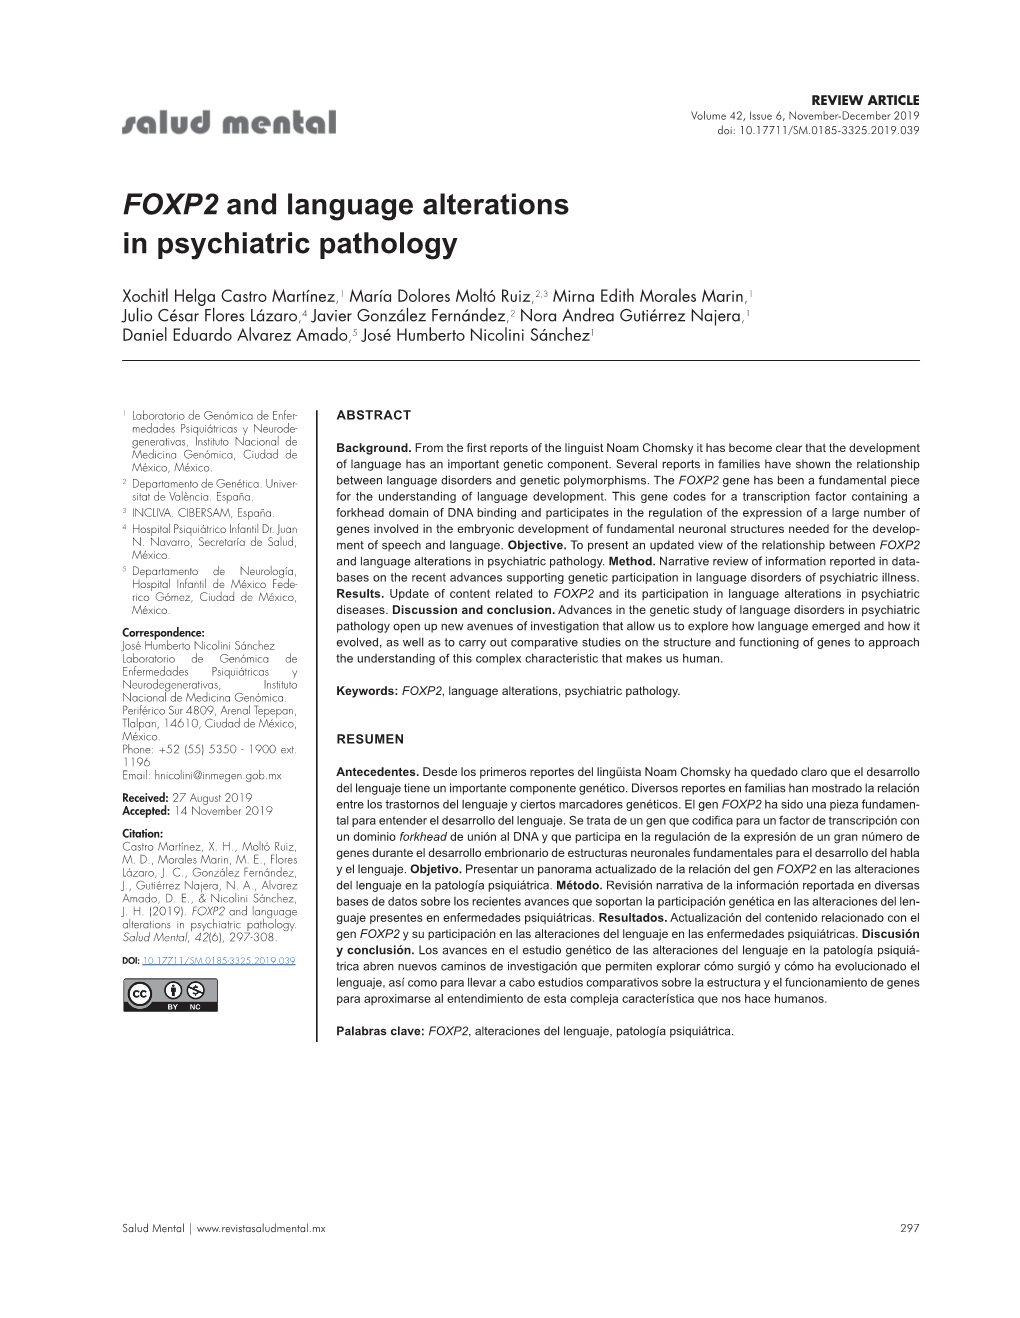 FOXP2 and Language Alterations in Psychiatric Pathology